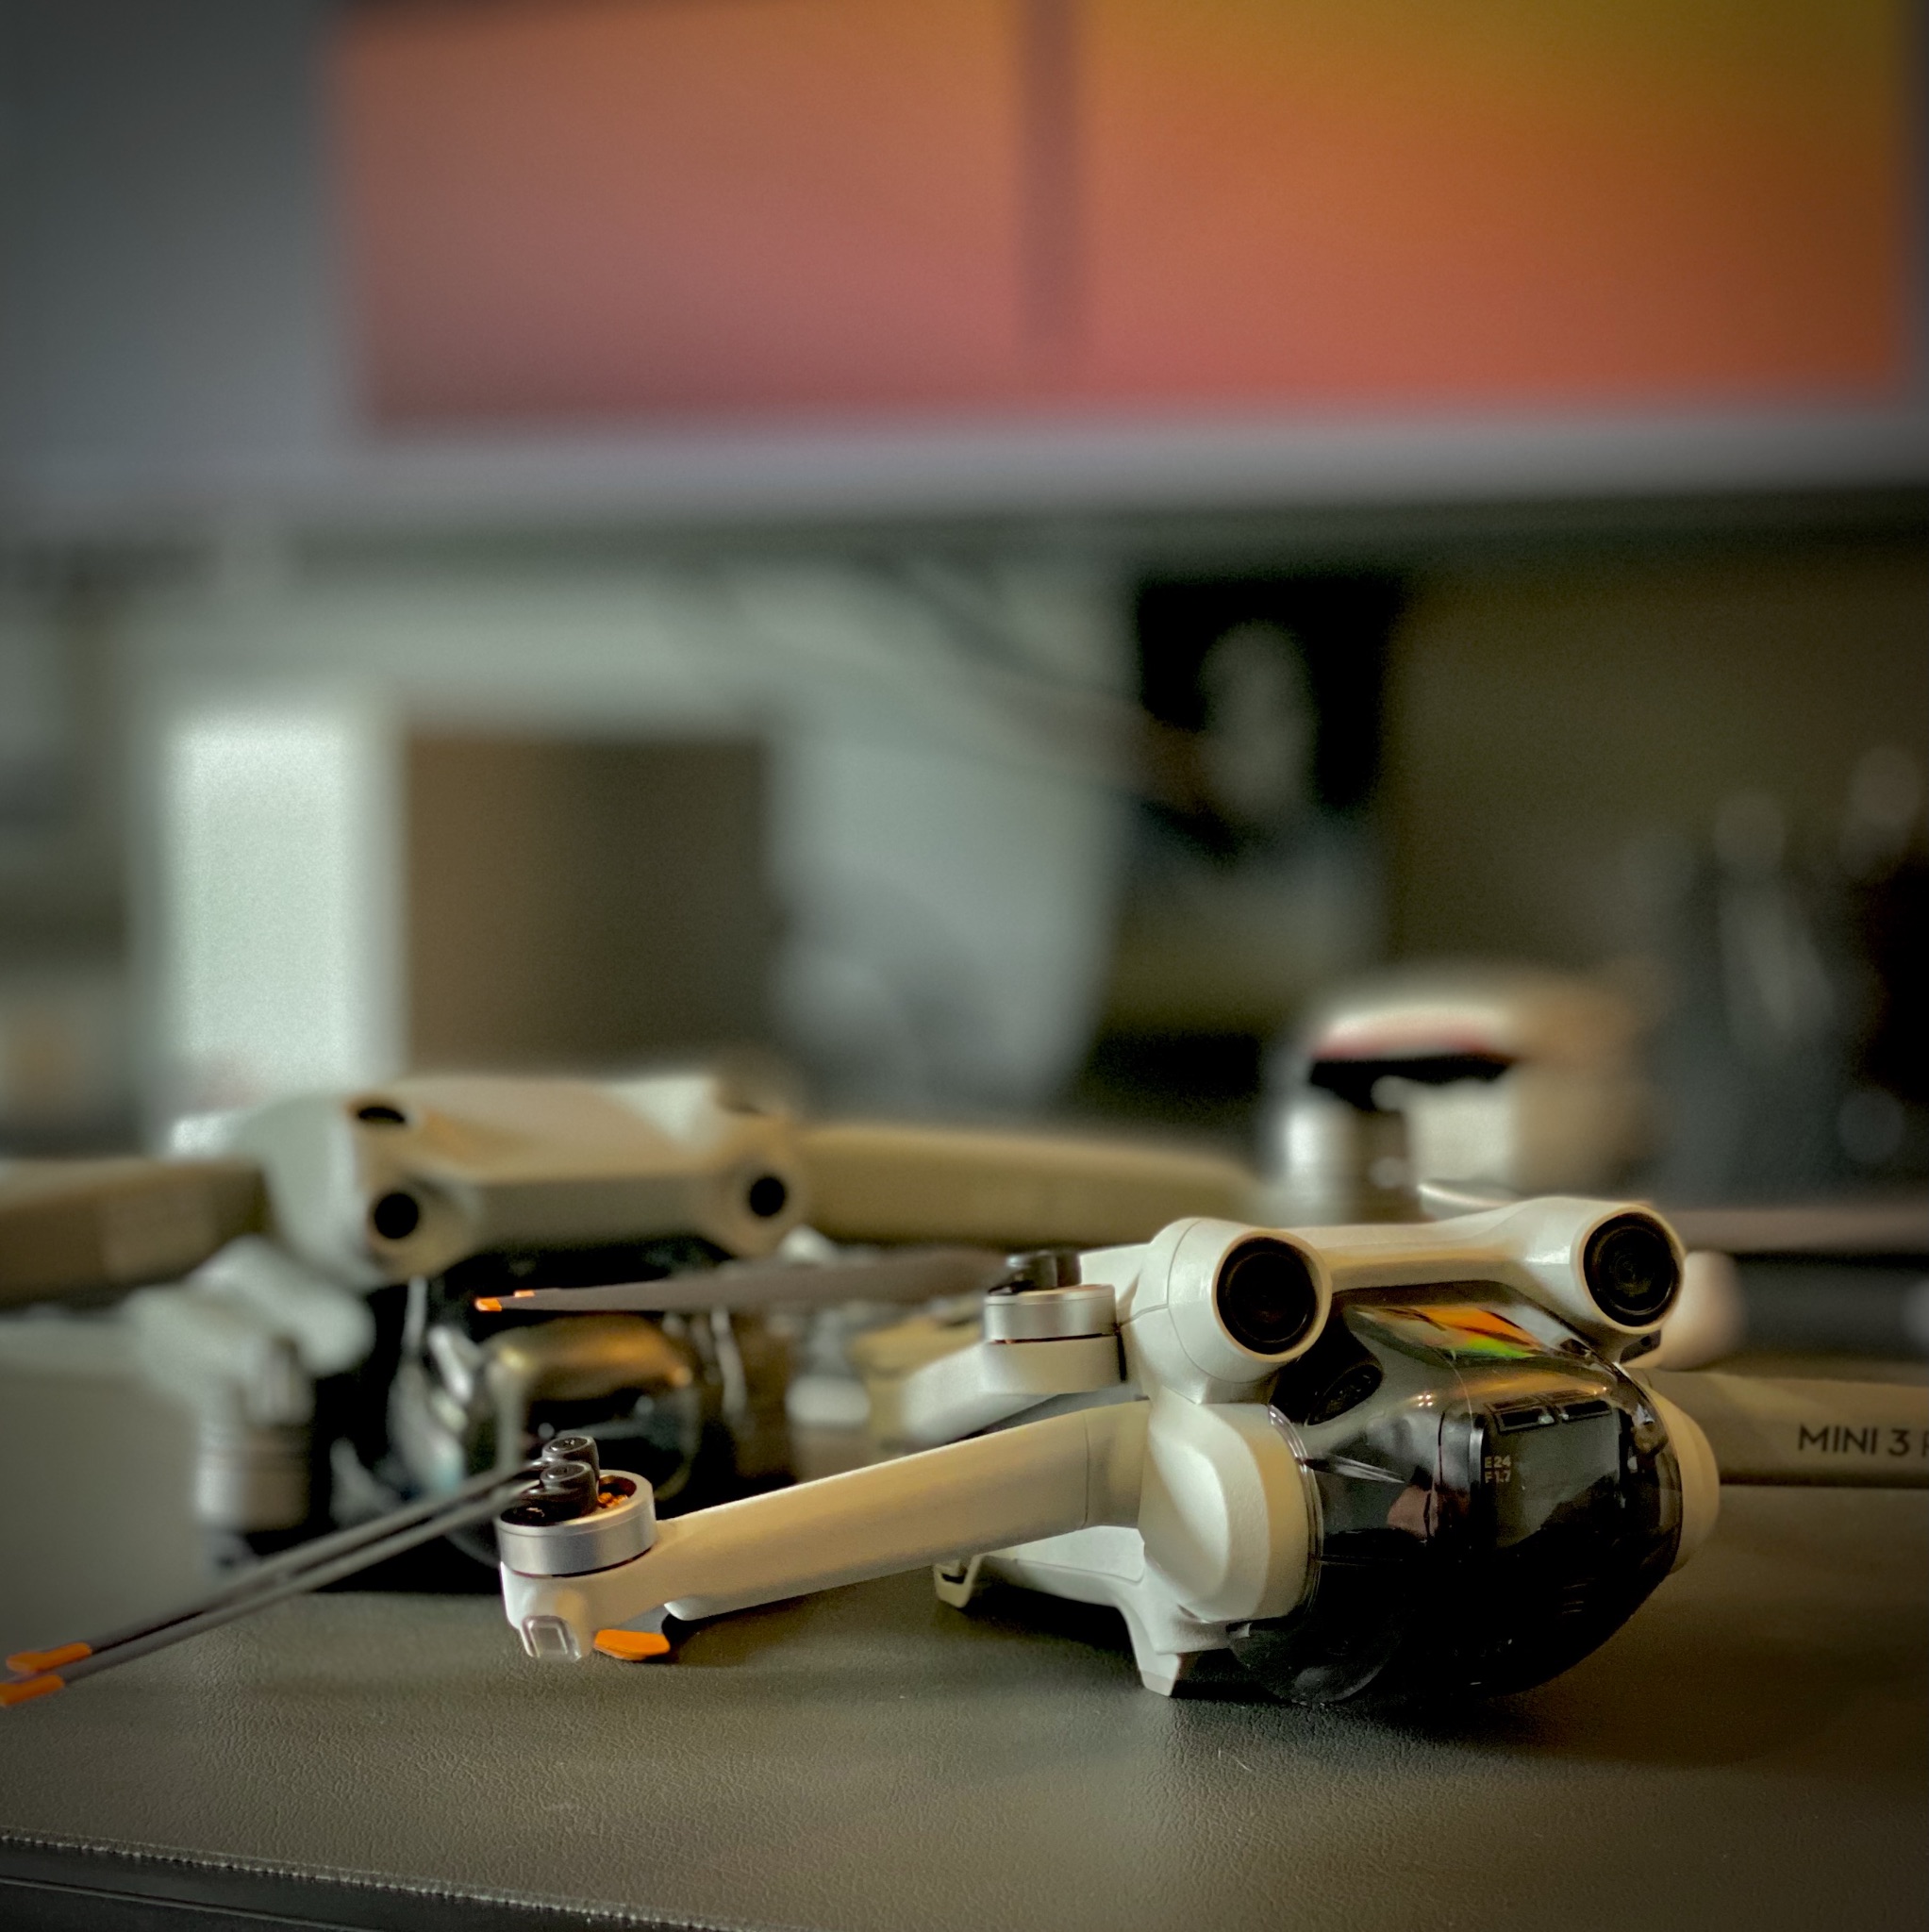 Two DJI drones, an Air 2s and a Mini 3 Pro sitting on a table 